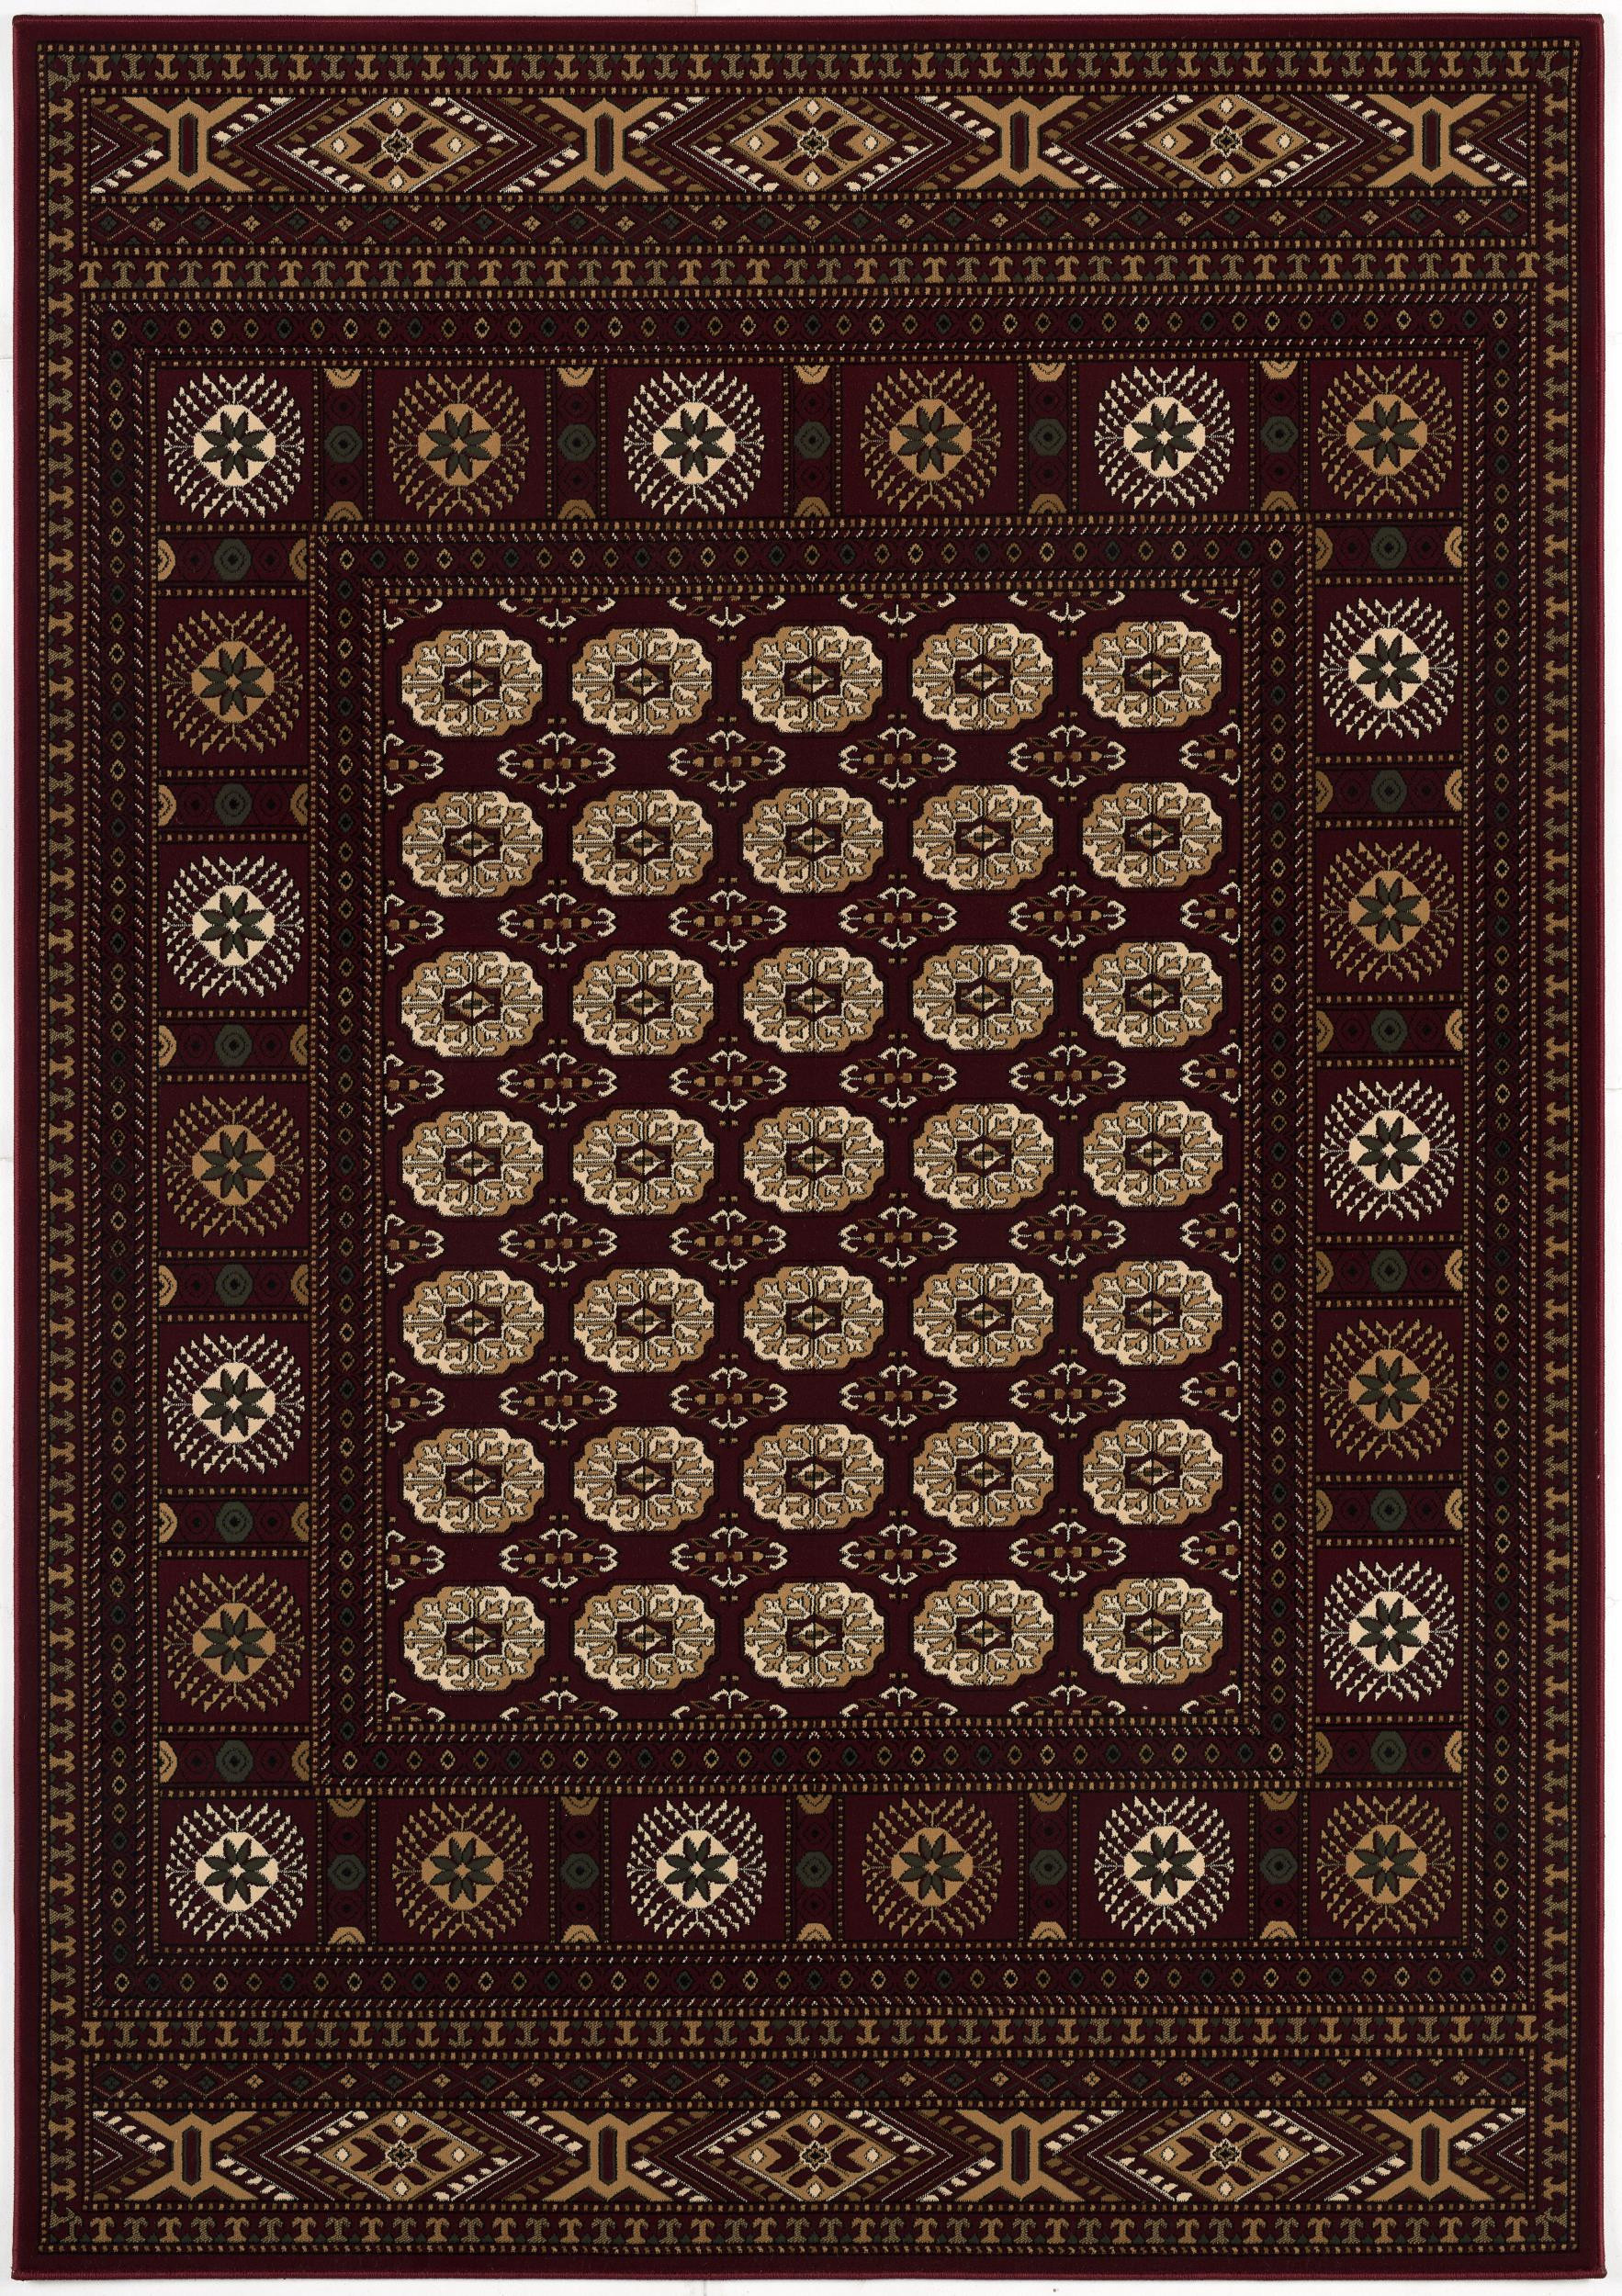 2’ x 20’ Red Eclectic Geometric Pattern Runner Rug-395455-1